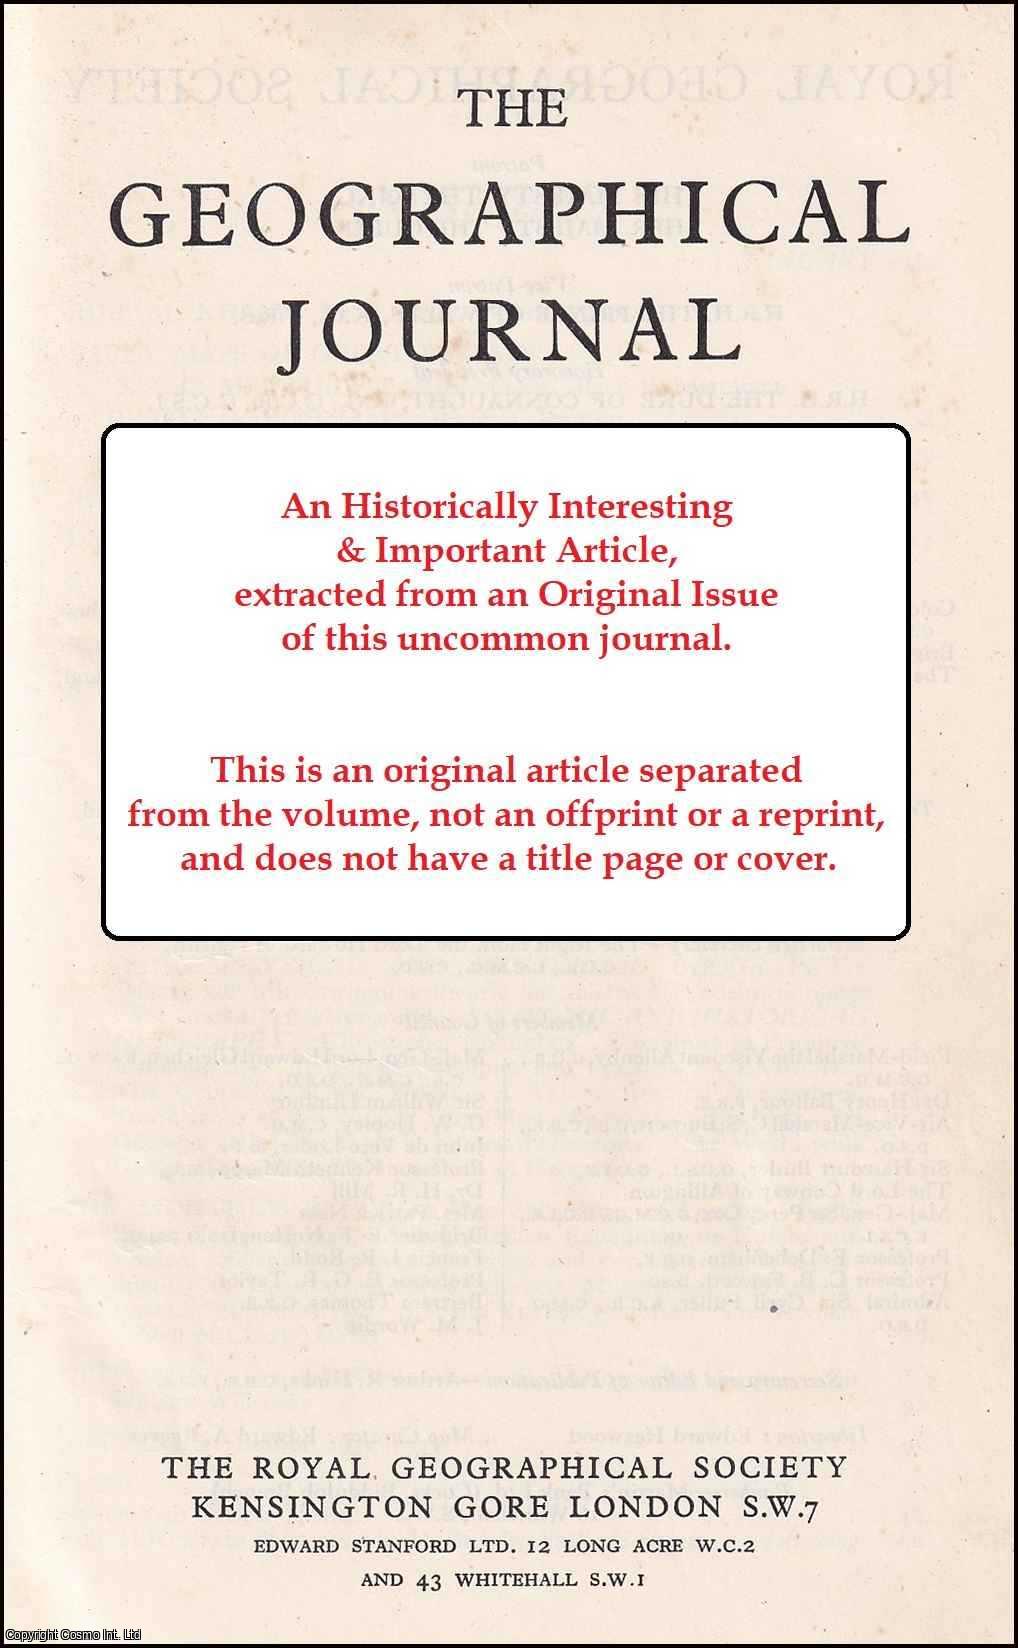 J. Ward-Perkins - Etruscan Towns: Roman Roads and Medieval Villages: The Historical Geography of Southern Etruria. An original article from the Geographical Journal, 1962.